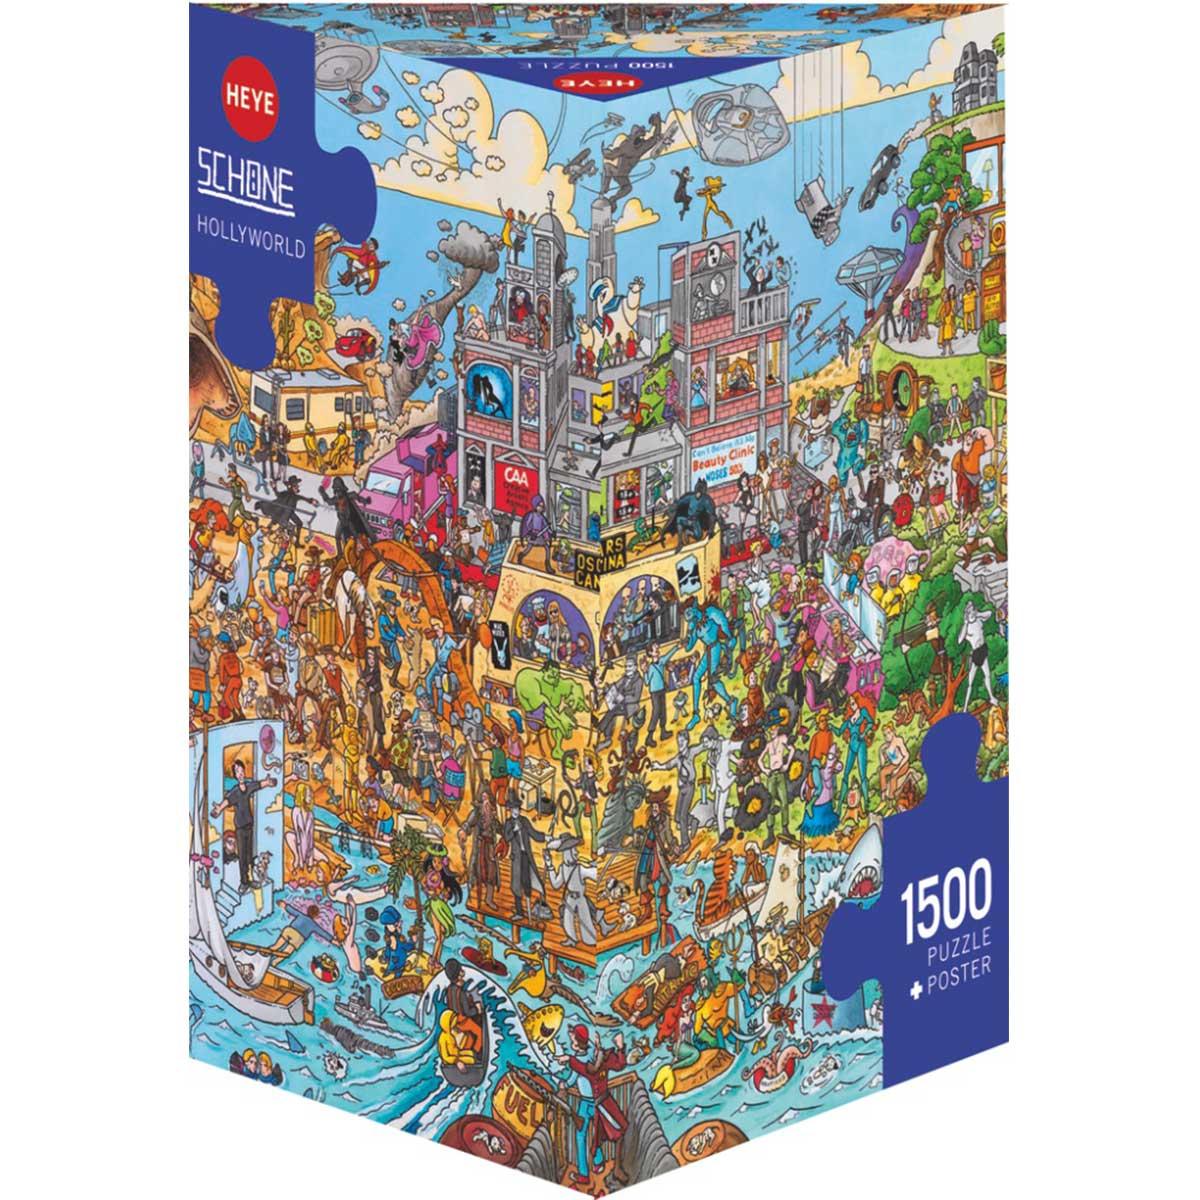 Selected image for HEYE  Puzzle 1500 delova Triangle Christoph Schone Hollyworld 29995